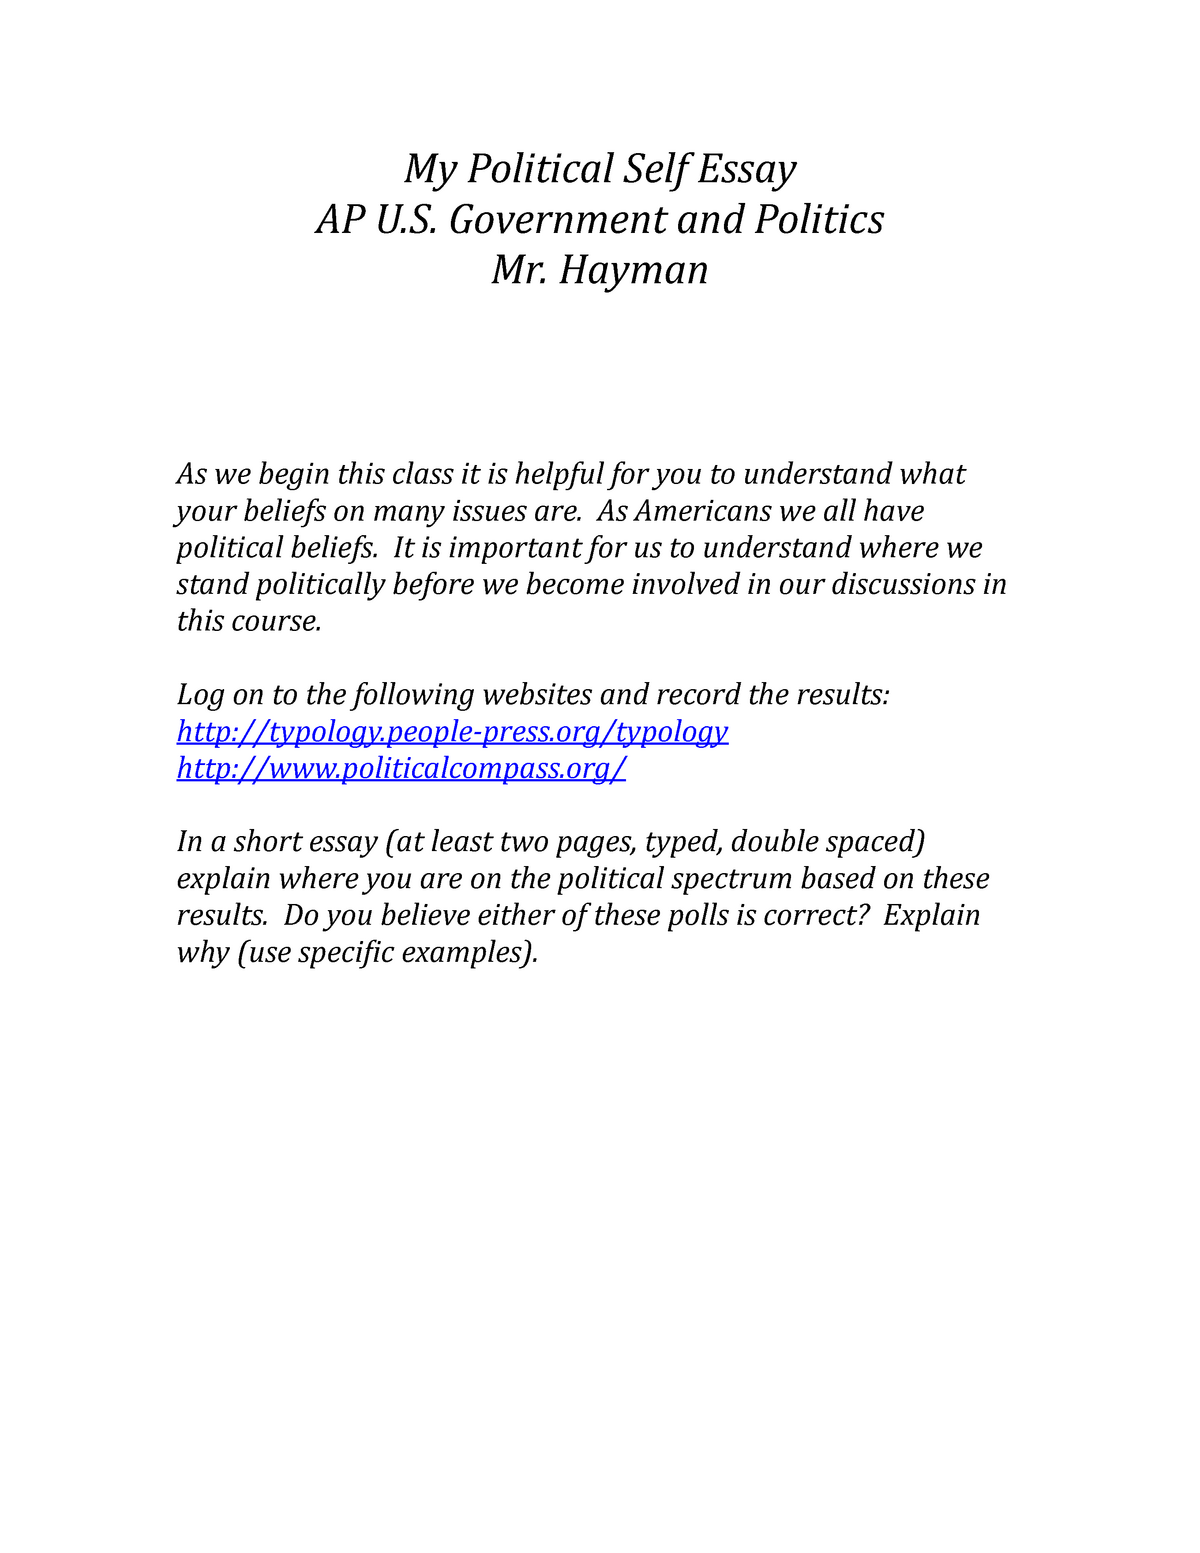 My Political Self Essay Government and Politics Mr. Hayman As we